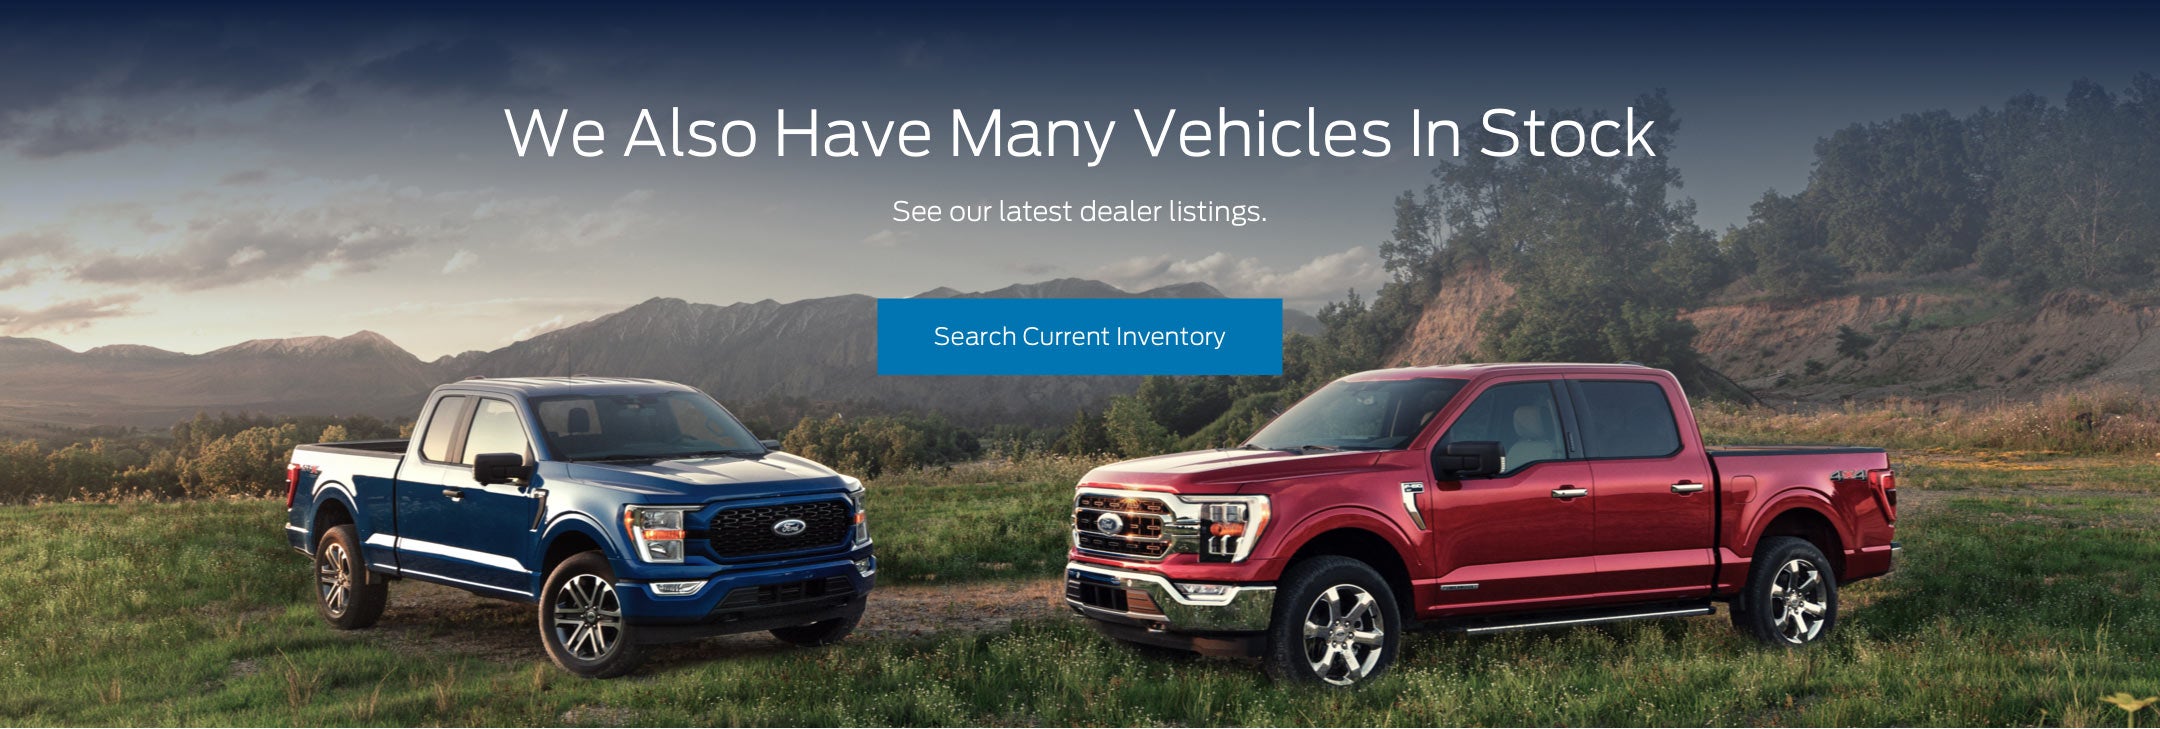 Ford vehicles in stock | Carriage Ford Inc in Clarksville IN